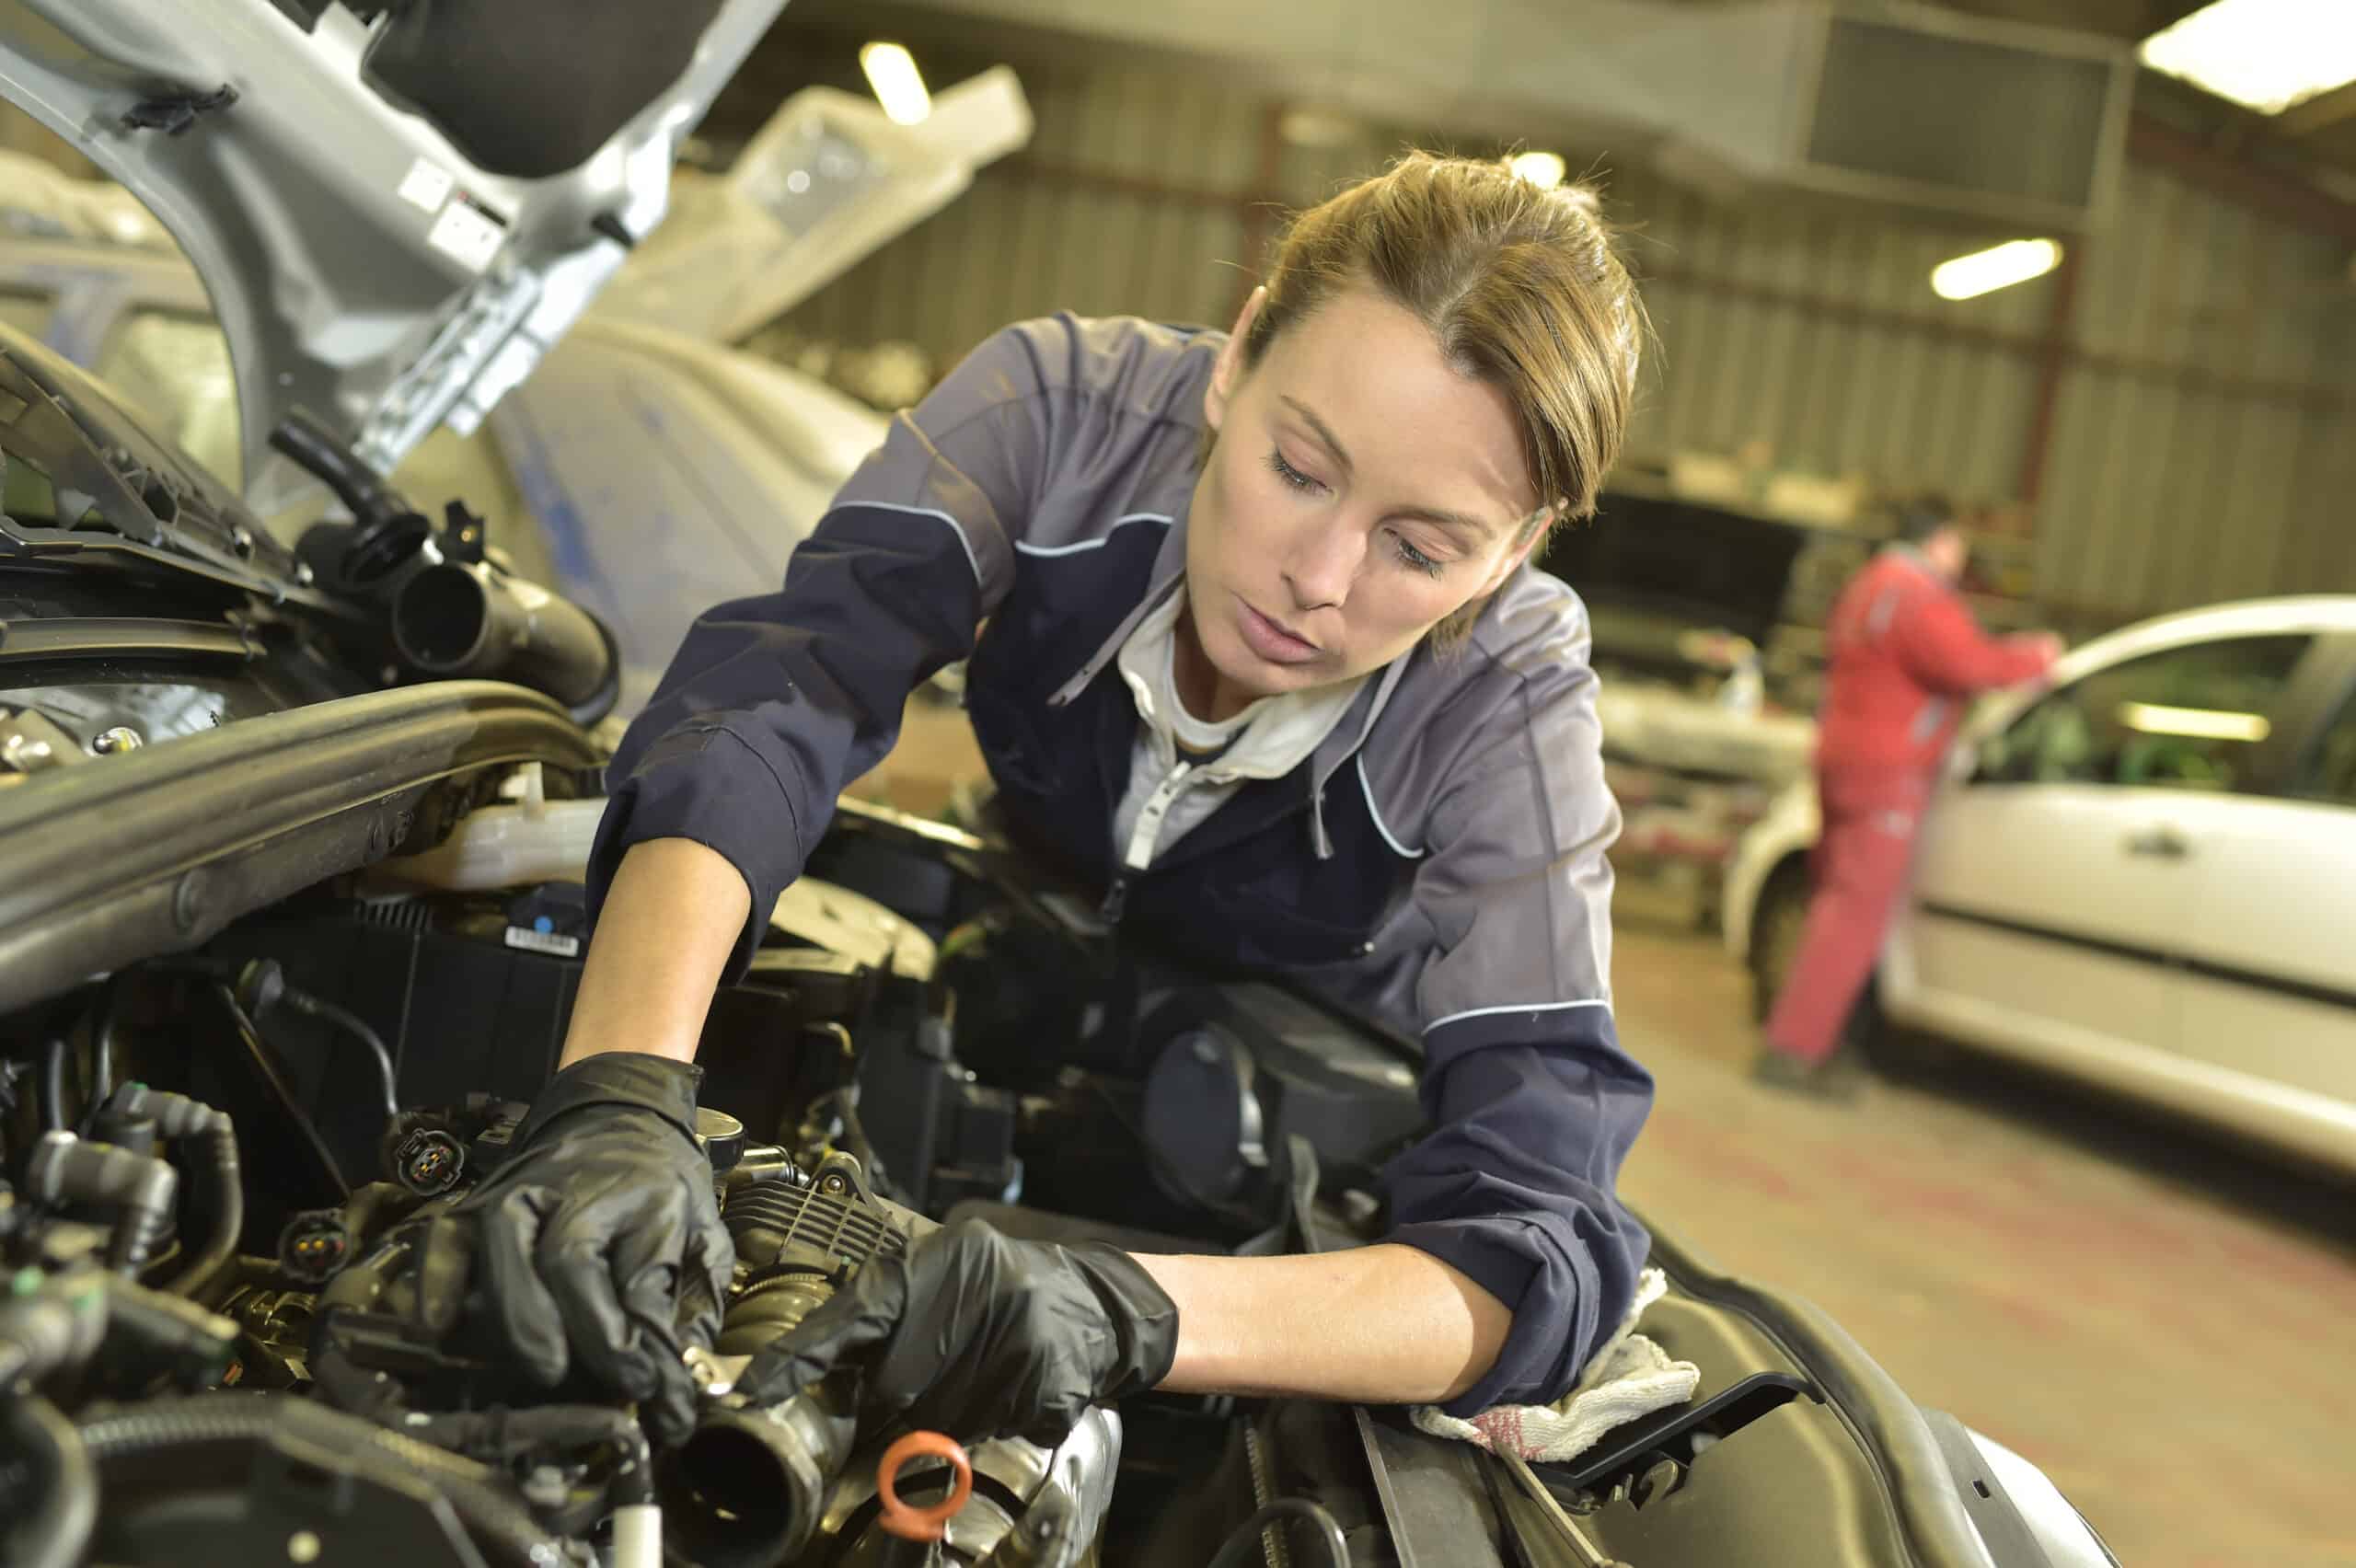 Work Wear PPE Requirements for Car Mechanics